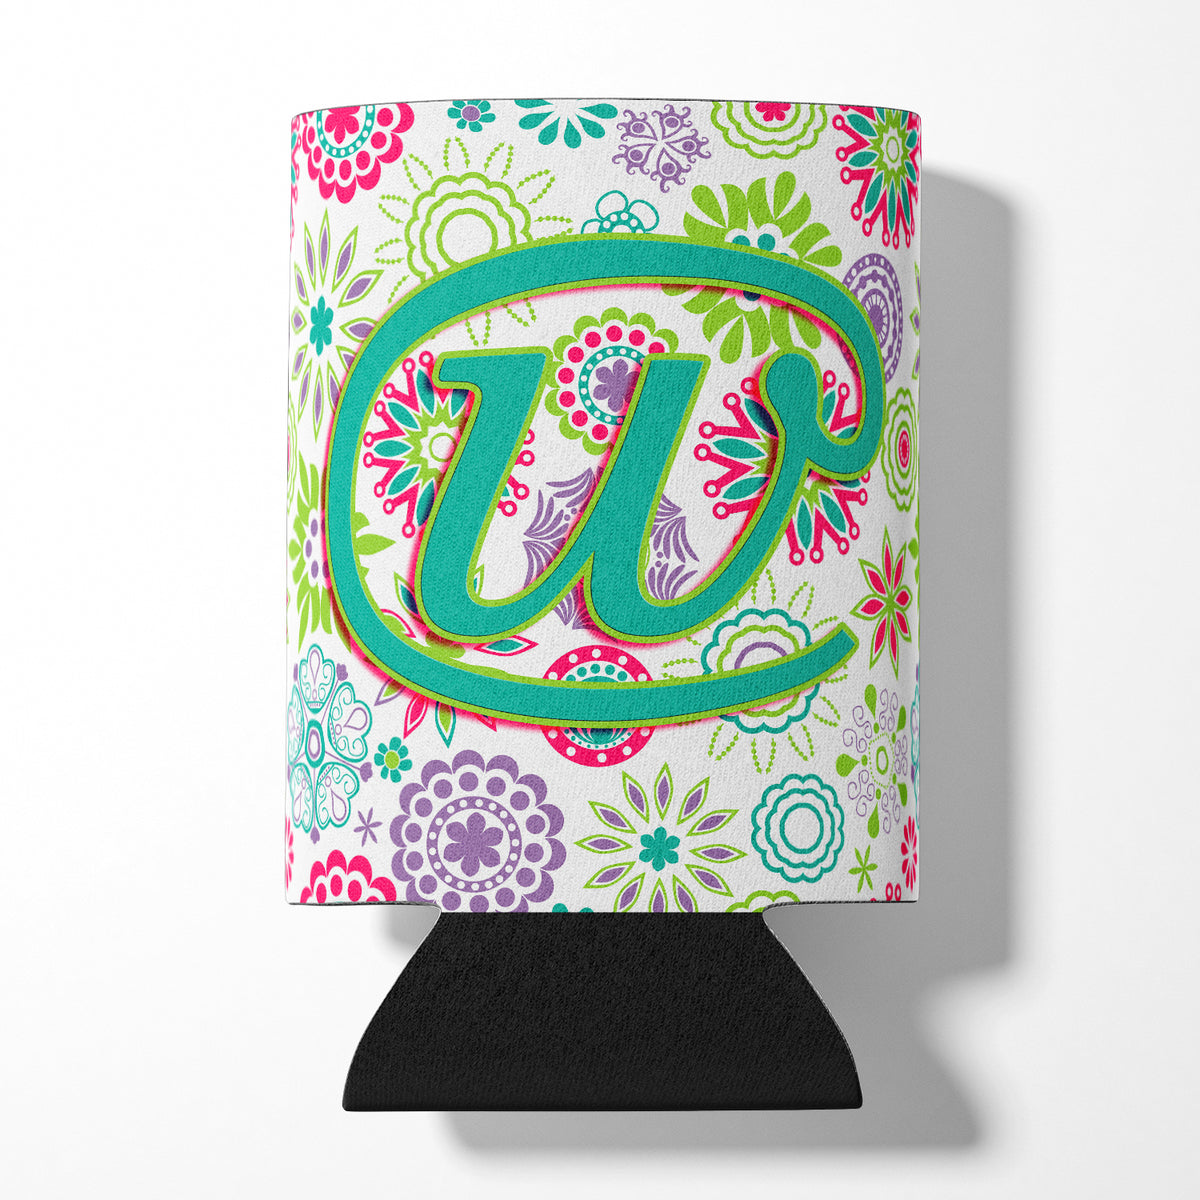 Letter W Flowers Pink Teal Green Initial Can or Bottle Hugger CJ2011-WCC  the-store.com.